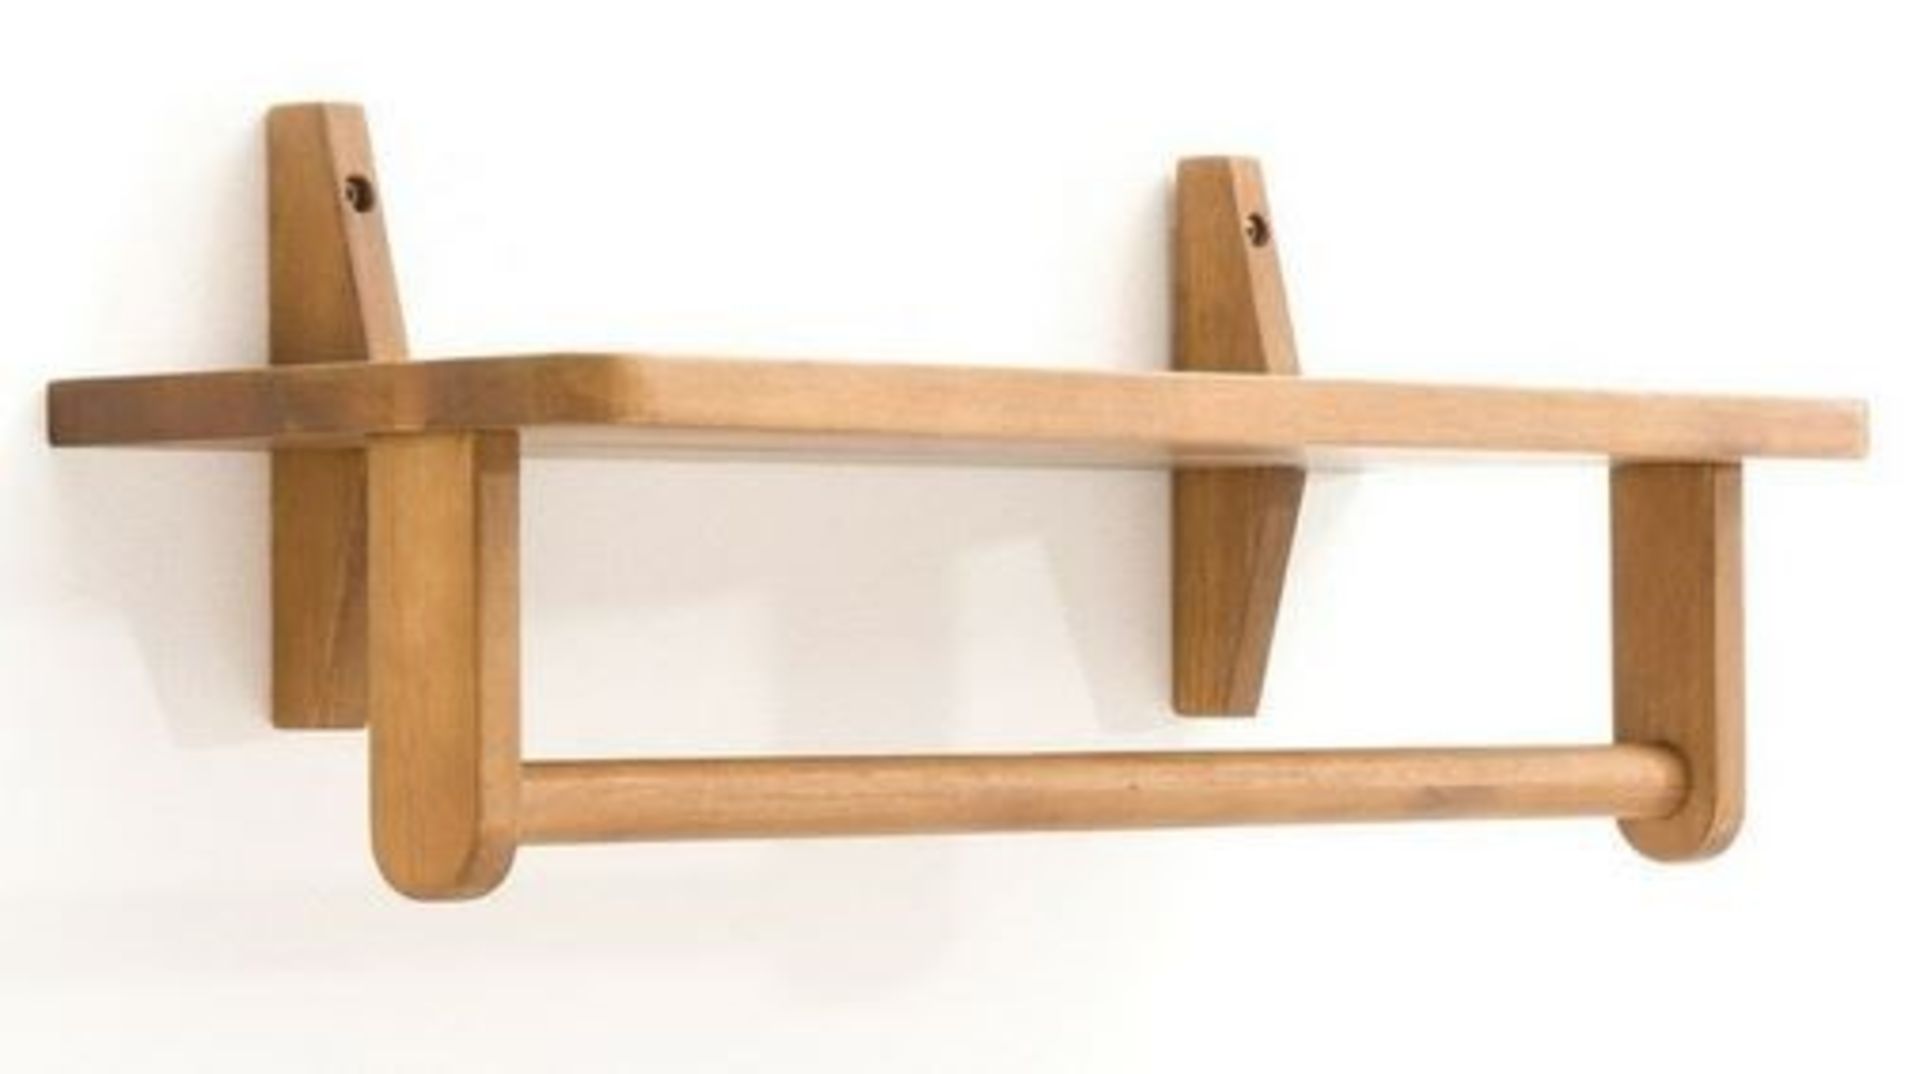 1 GRADE B BOXED DESIGNER WOODEN SHELF IN OAK / RRP £32.99 (PUBLIC VIEWING AVAILABLE) - Image 2 of 2